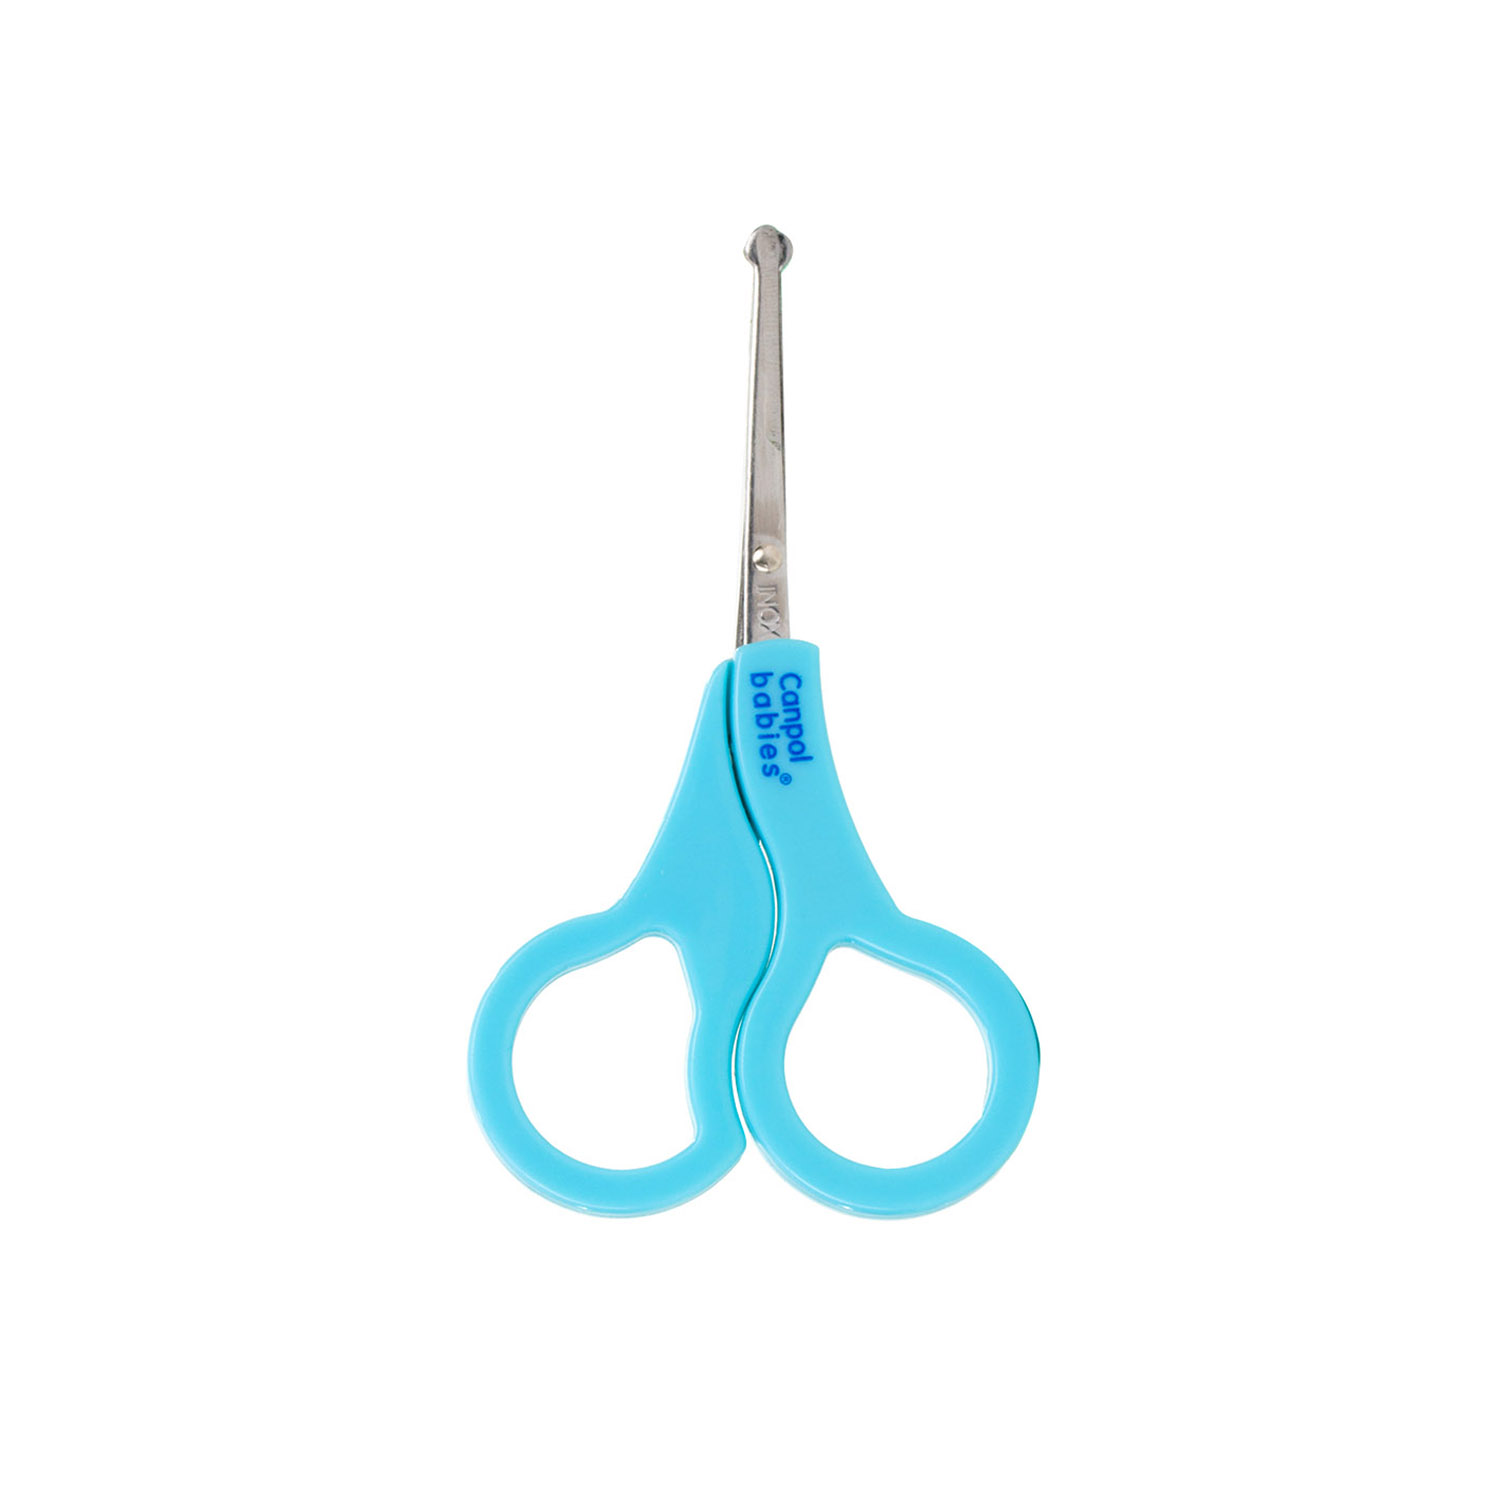 Canpol babies Round Tip Baby Nail Scissors with Cover